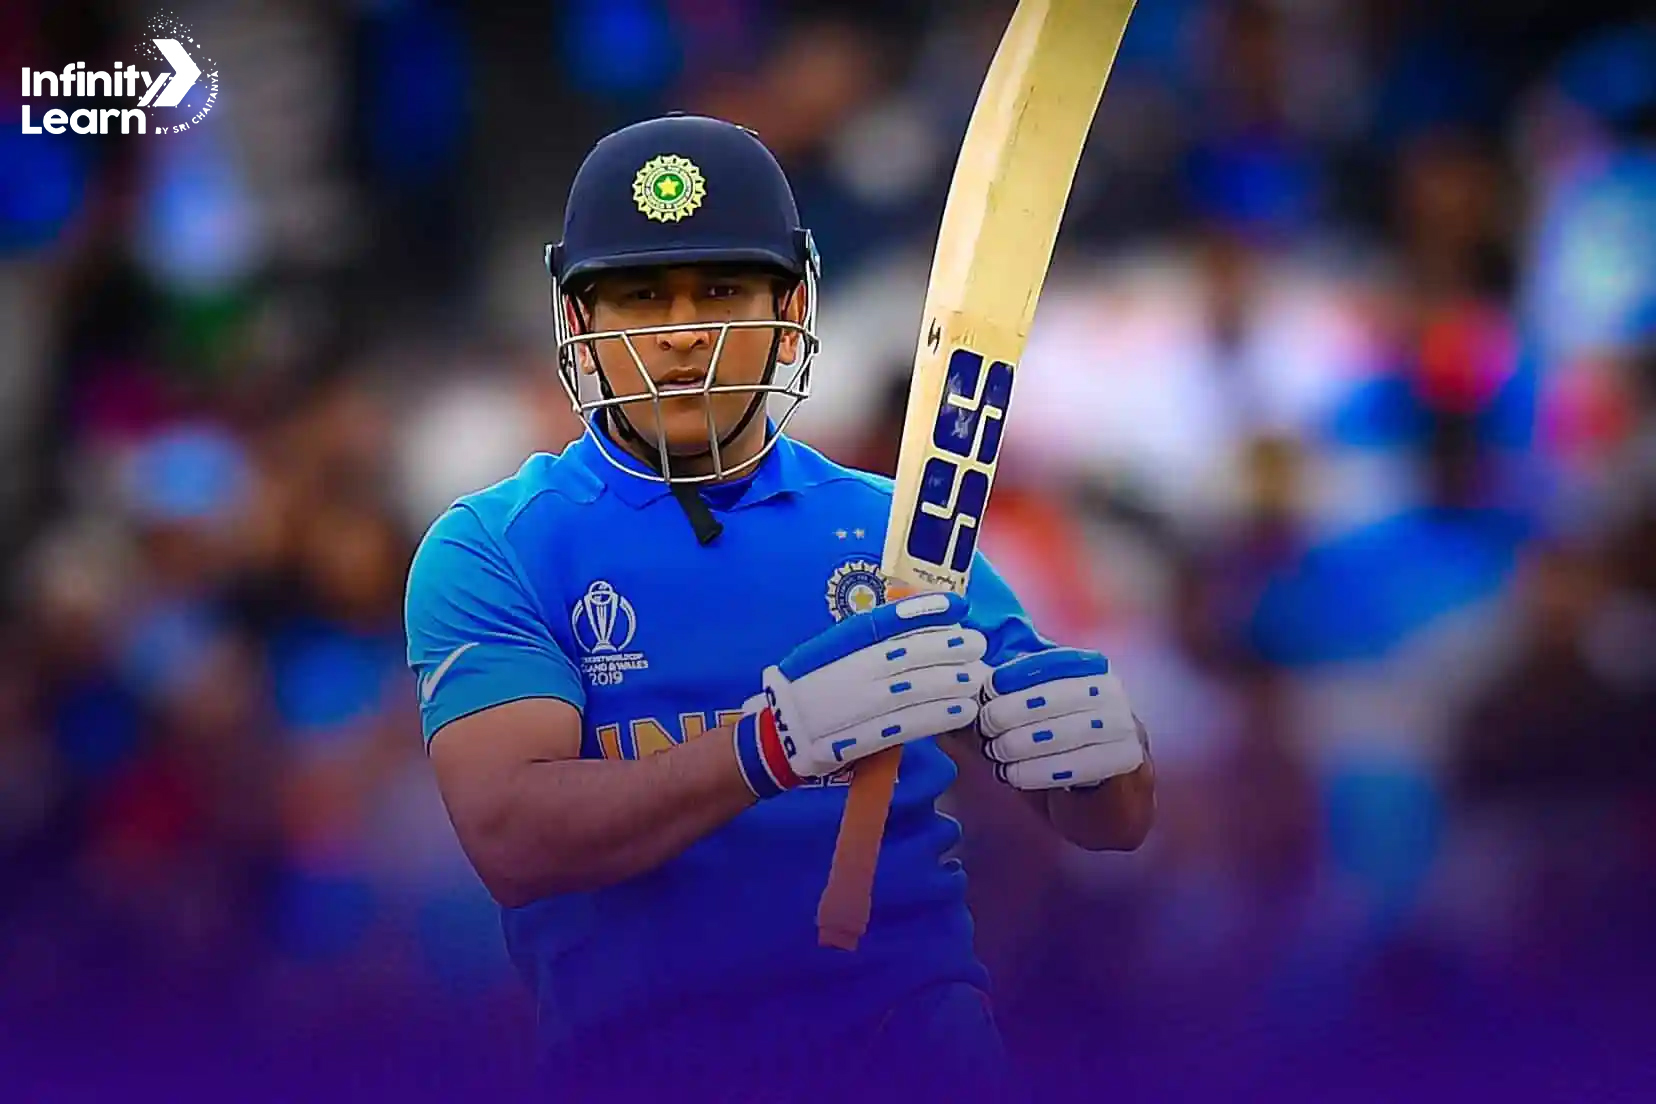 MS Dhoni 2019 World Cup